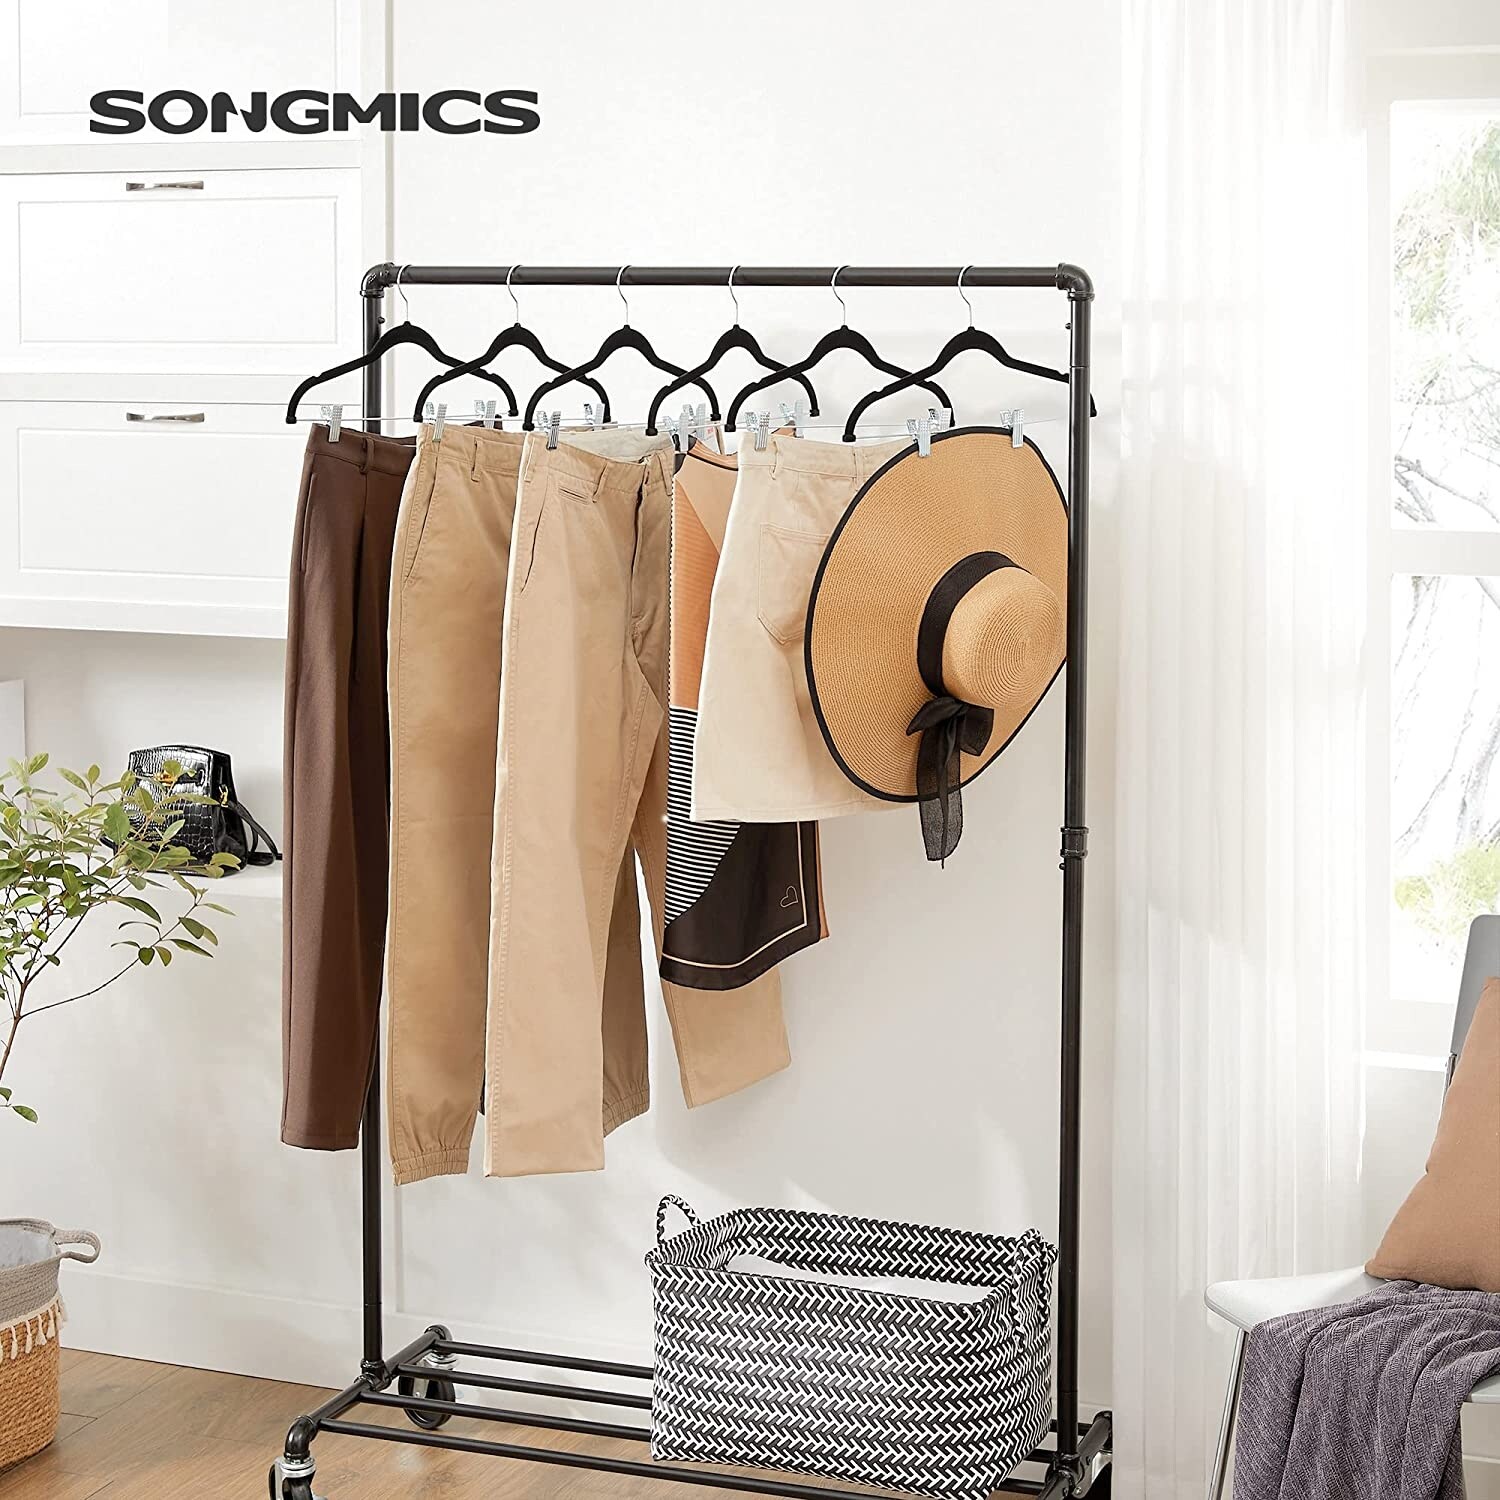 https://ak1.ostkcdn.com/images/products/is/images/direct/1a97a8015c7ed06202c4d1e5eba8f961948afa95/SONGMICS-16.7-Inch-Long-Pants-Hangers%2C-Set-of-30-Velvet-Hangers-with-Adjustable-Clips%2C-Non-Slip-for-Skirts%2C.jpg